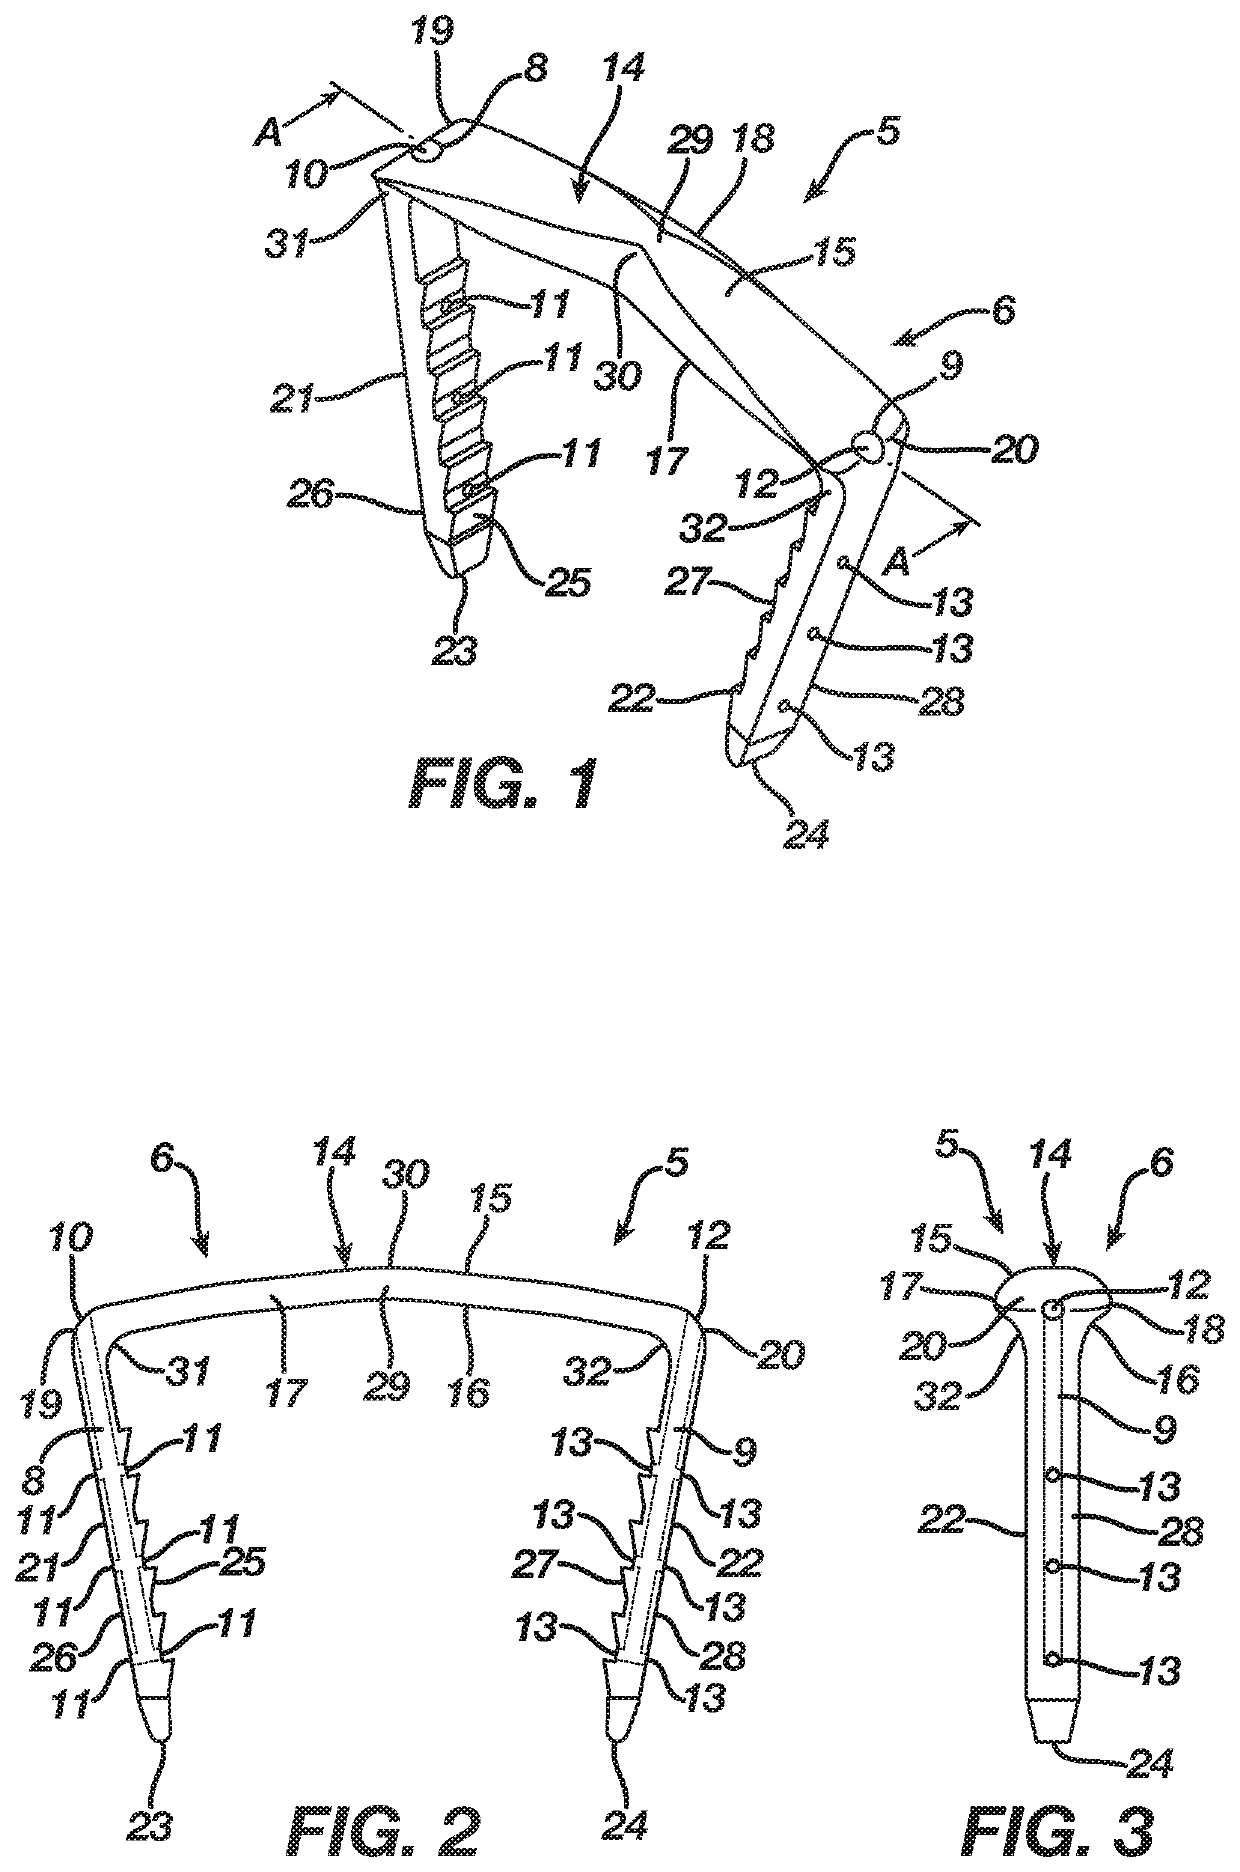 Method and apparatus for a shape memory implant